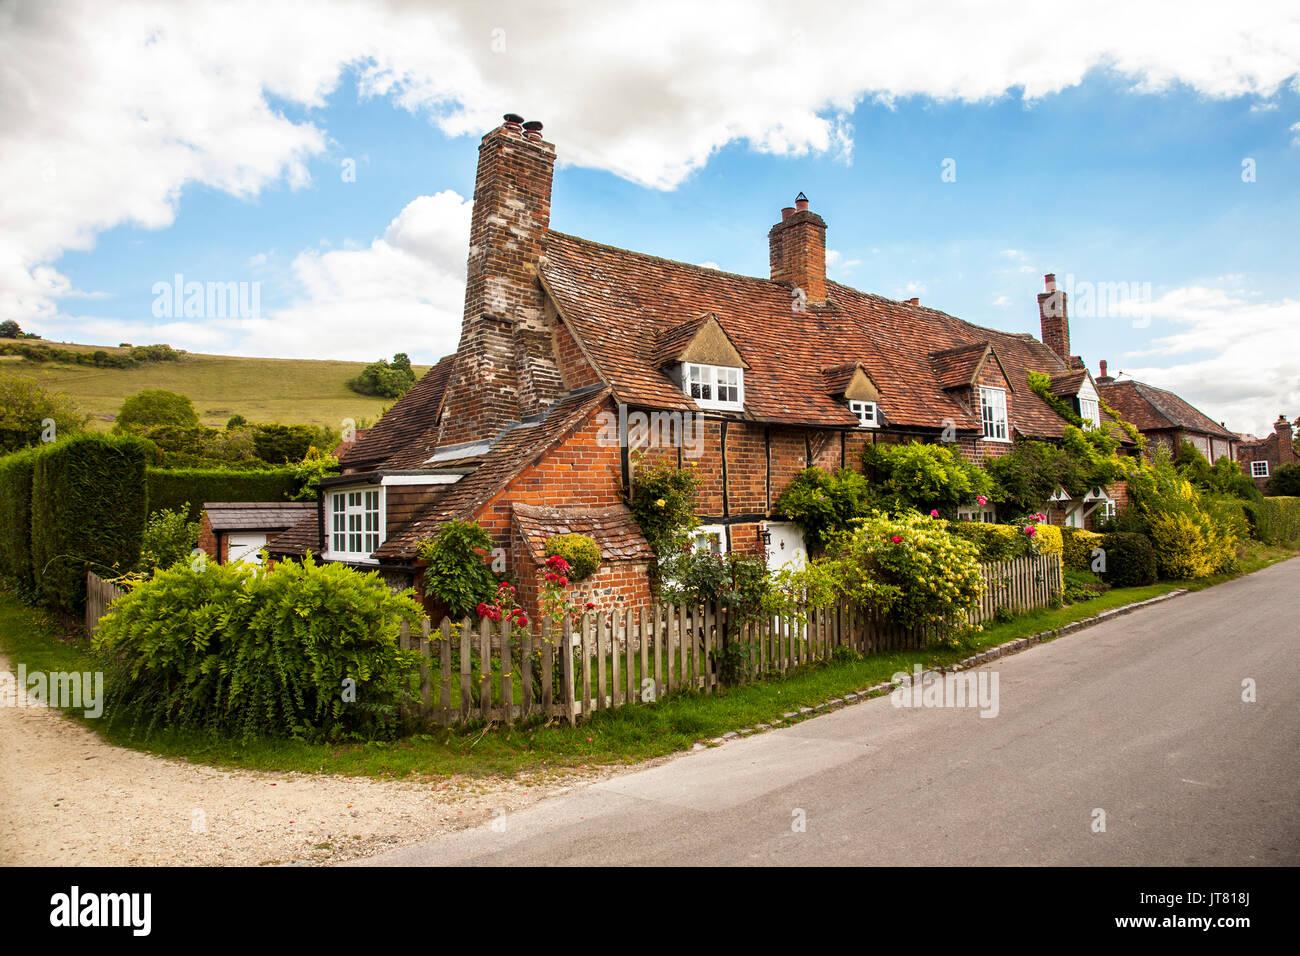 Cottages in the tranquil  rural English village of Turville in the Chiltern Hills  Buckinghamshire  setting  for Midsomer Murders and vicar of Dibley Stock Photo